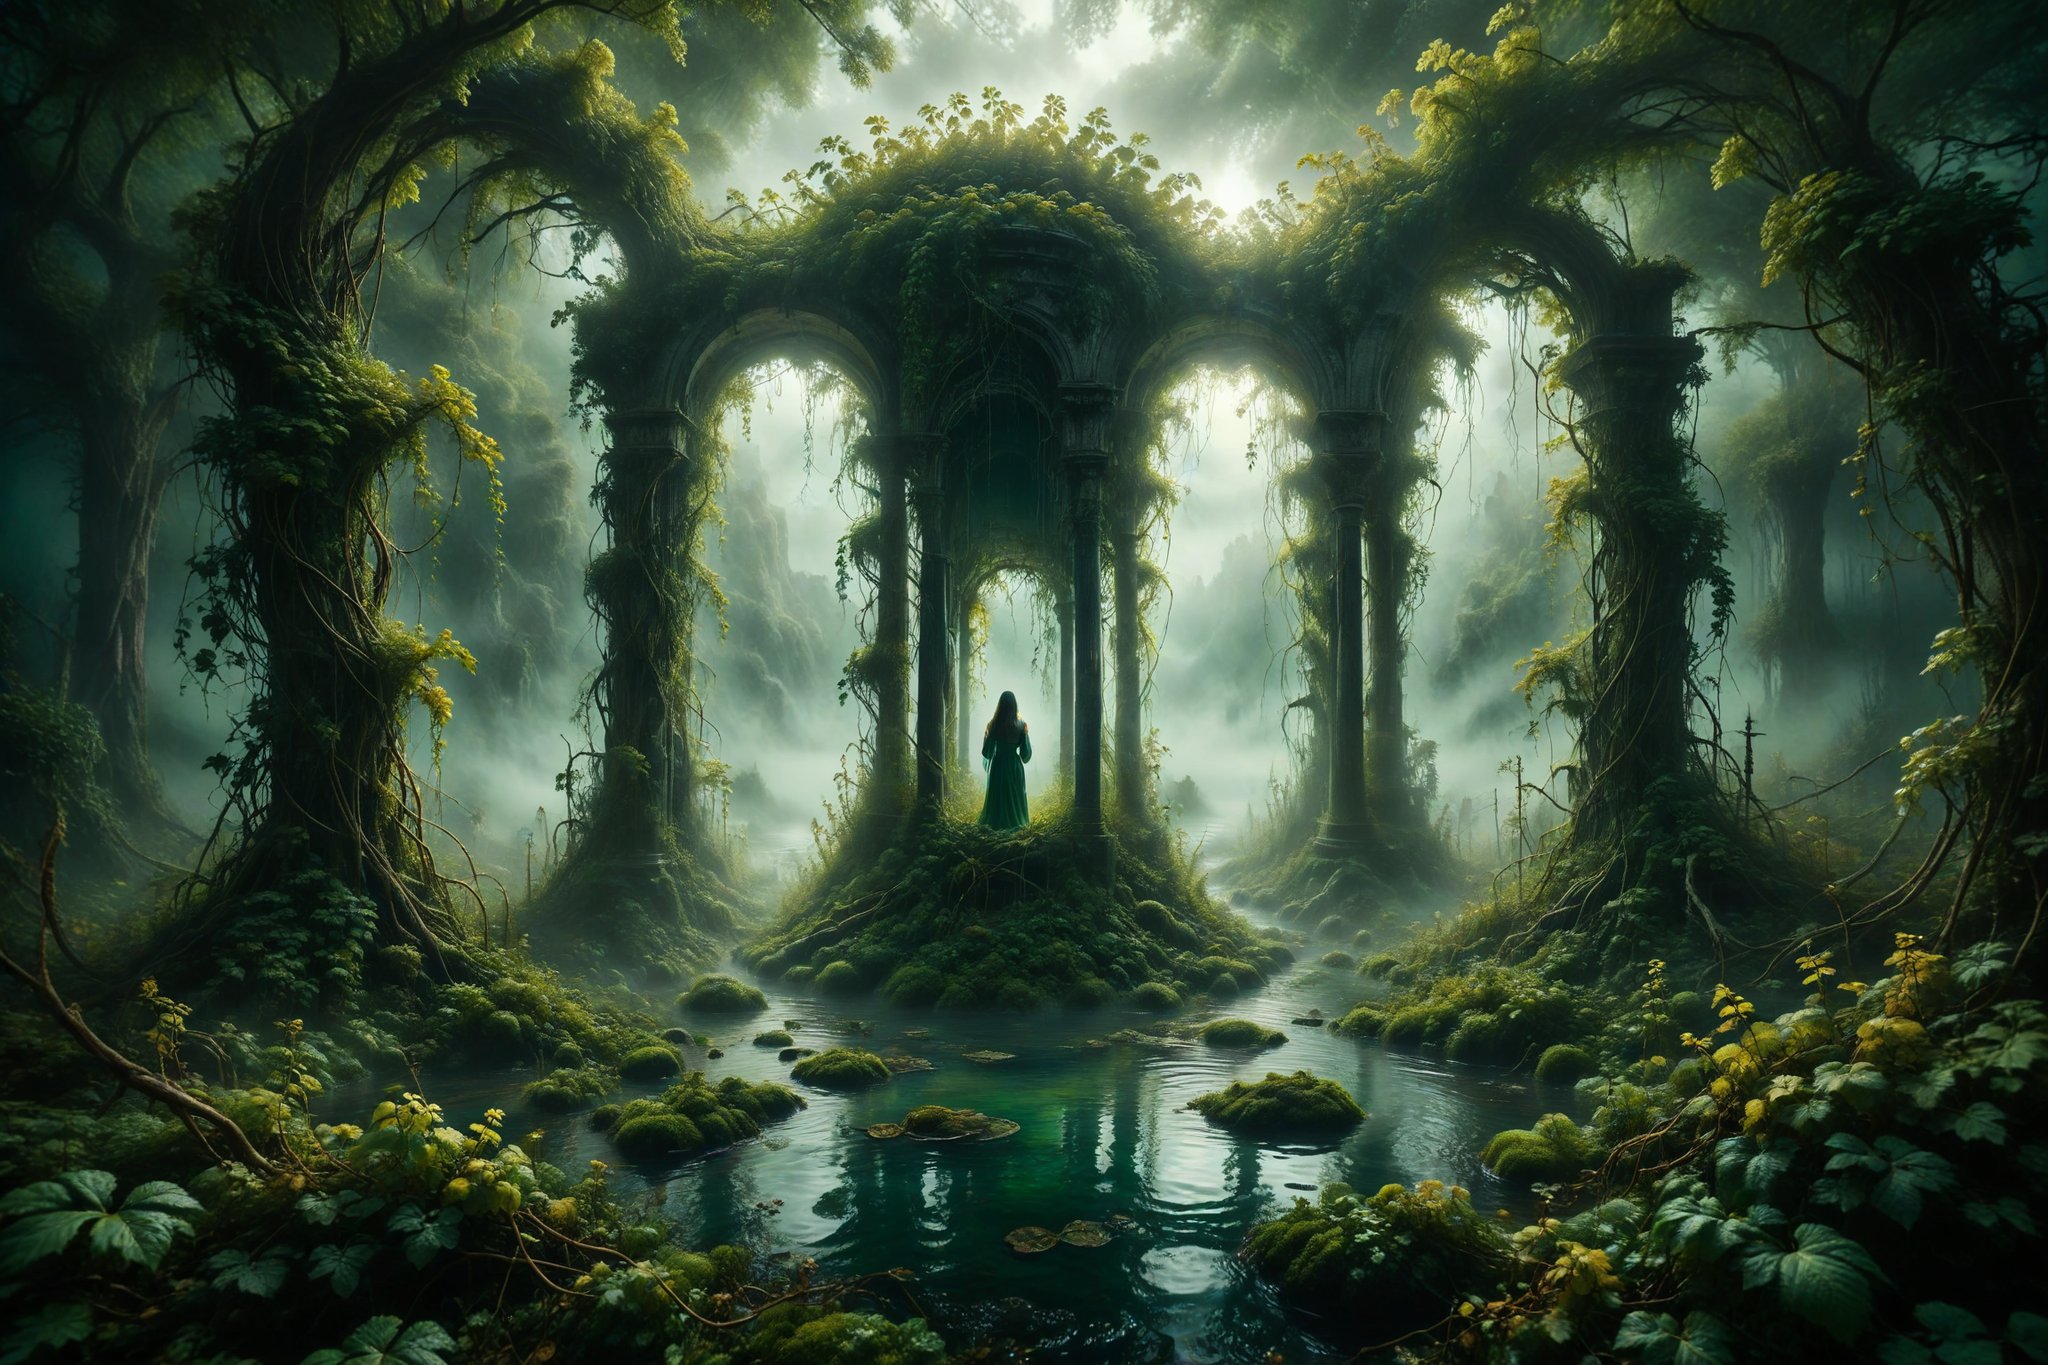 A deep well surrounded by golden vines snaking through emerald green mist, reflecting distorted images of the deepest desires of those who gaze into it.